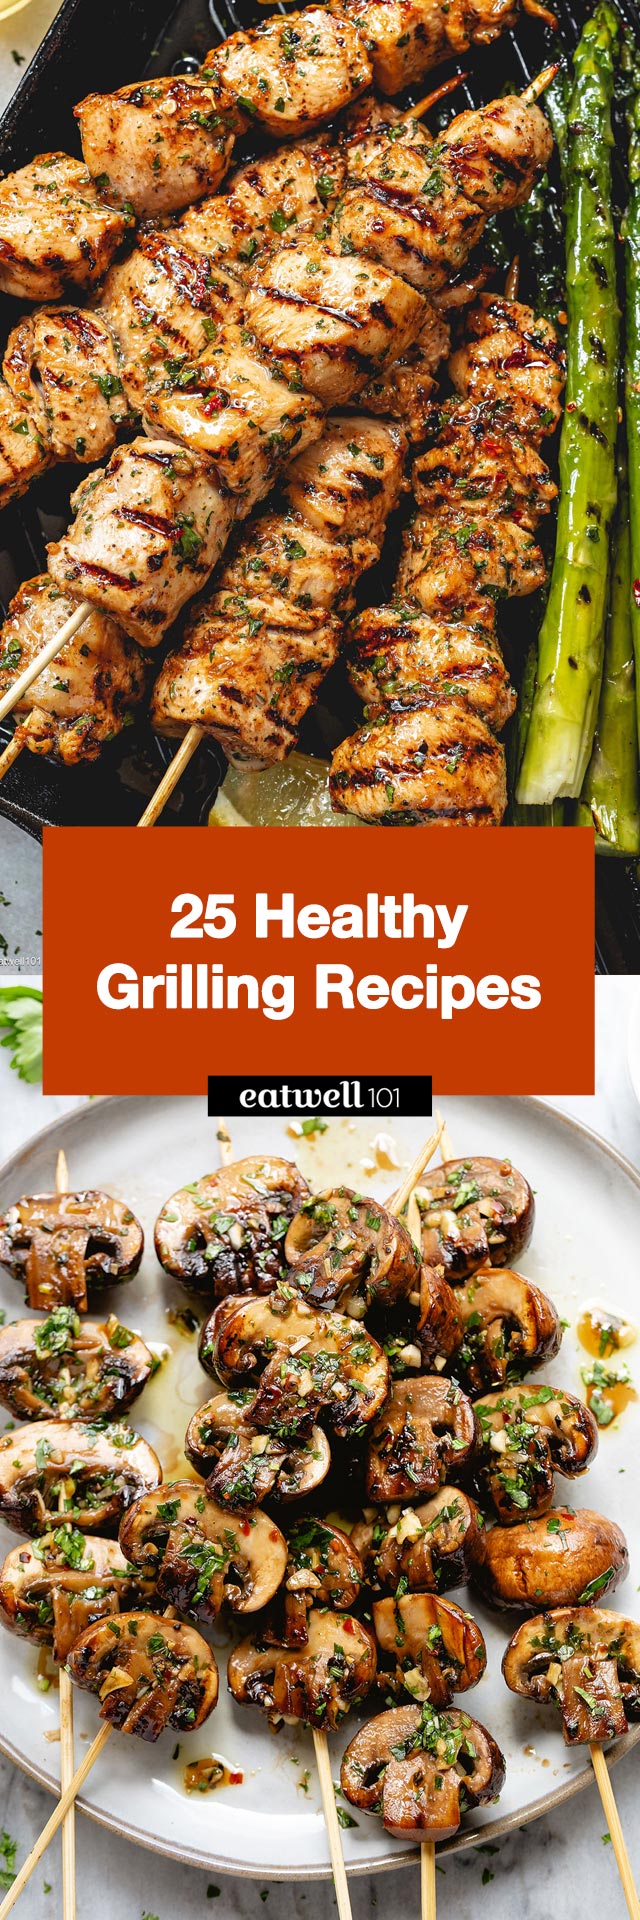 25 Healthy Grilling Recipes - #grilling #recipes #eatwell101 - Try these delicious, healthy grilling recipes to create nutritious meals on the grill that you and your family will love. From grilled vegetables to fish tacos and chicken skewers, these recipes will have you grilling like a pro!